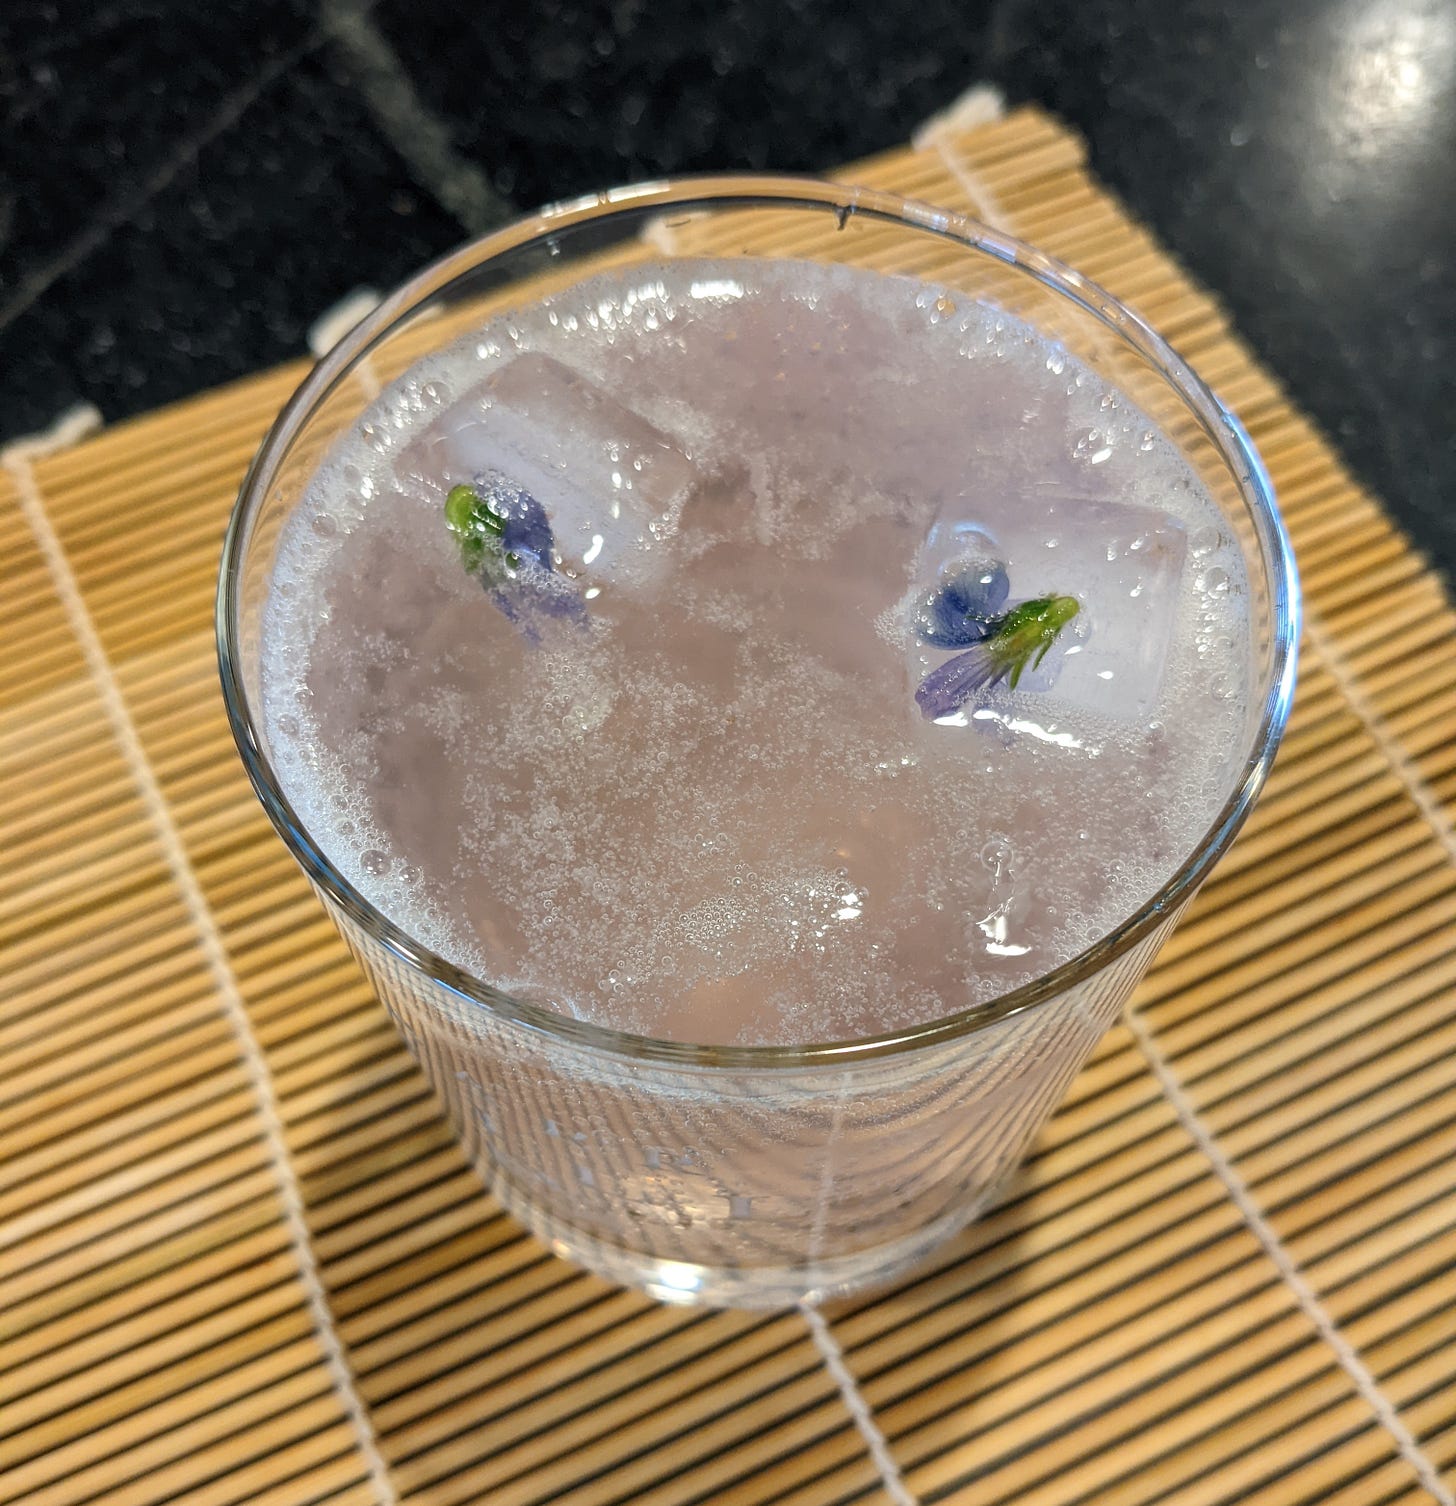 A small glass containing a fizzy lemonade drink that's just barely tinted purple. Two ice cubes with violets in them float in the glass.